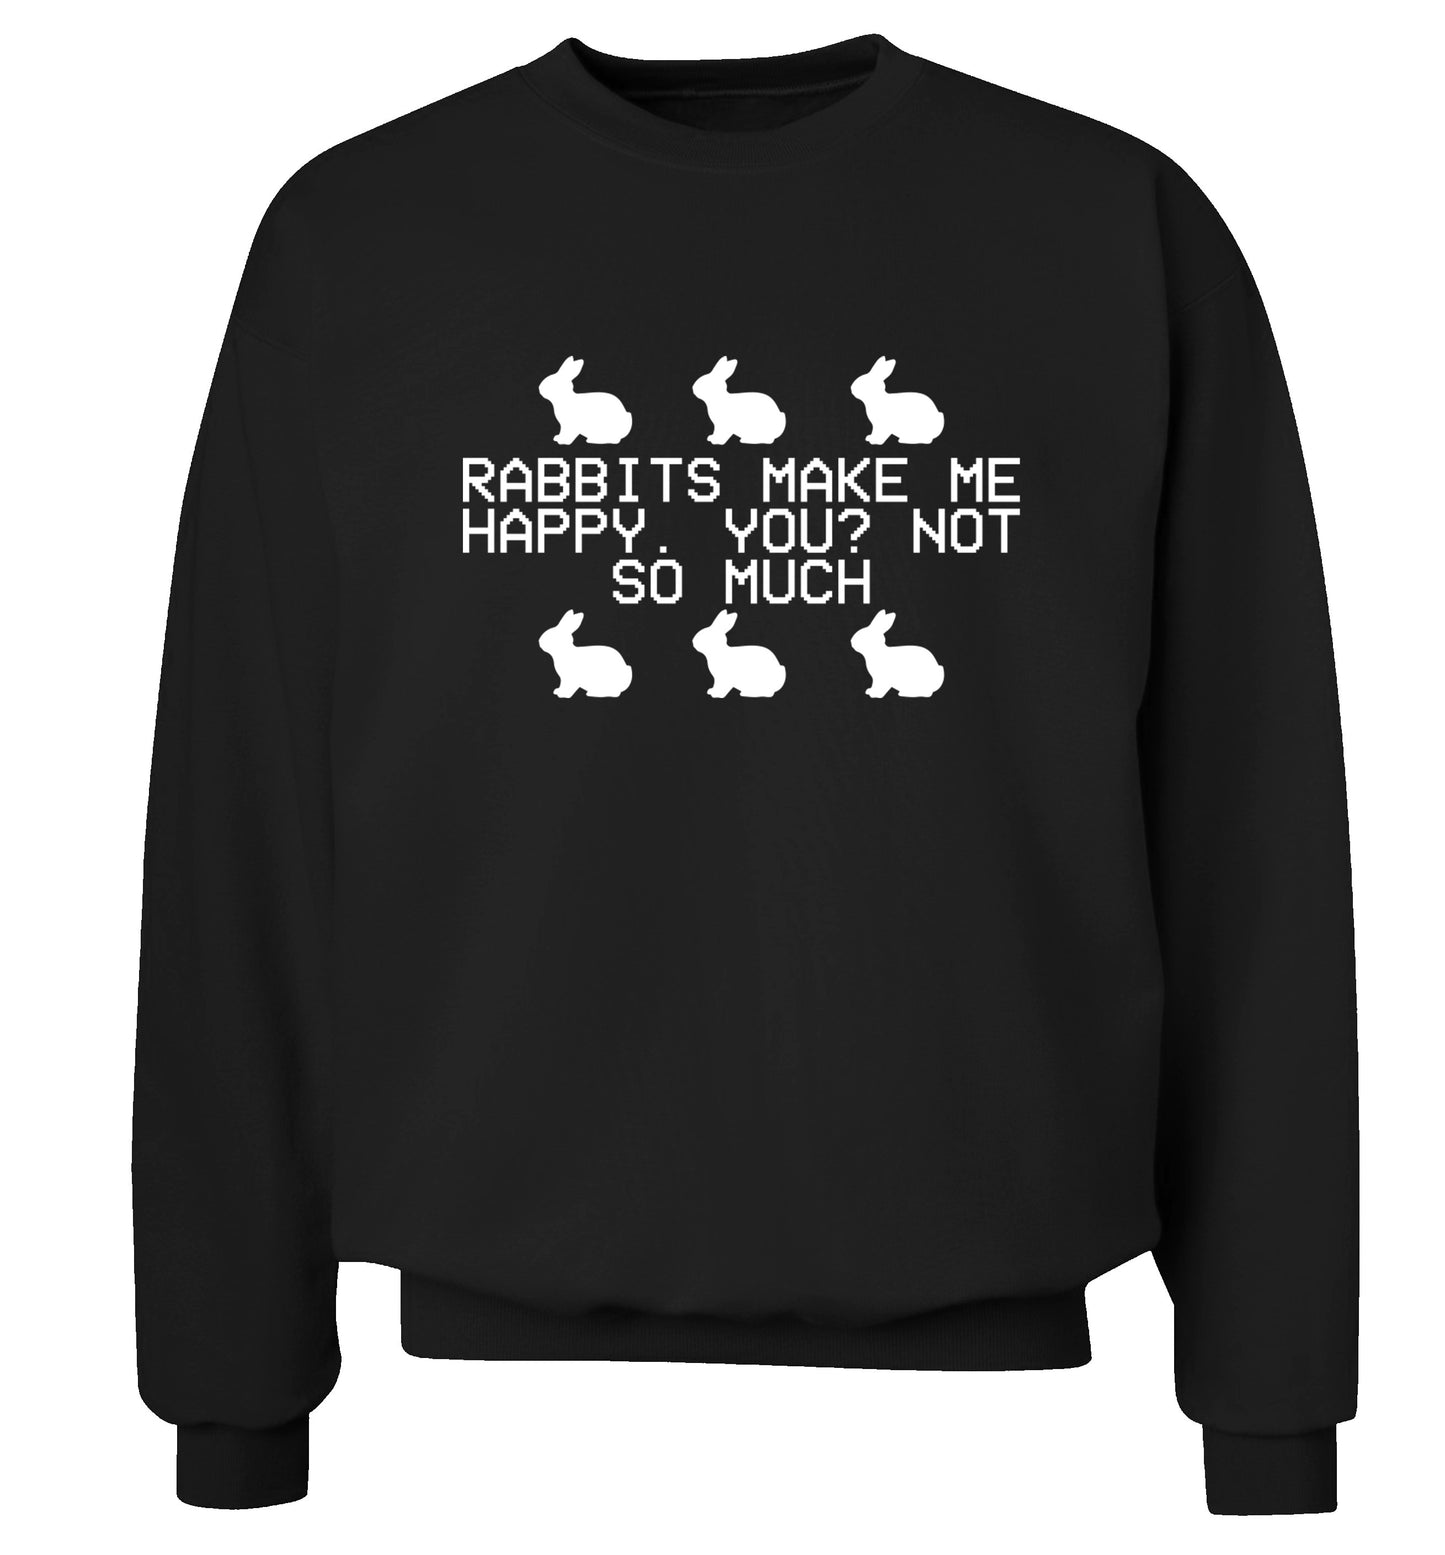 Rabbits make me happy, you not so much Adult's unisex black  sweater 2XL